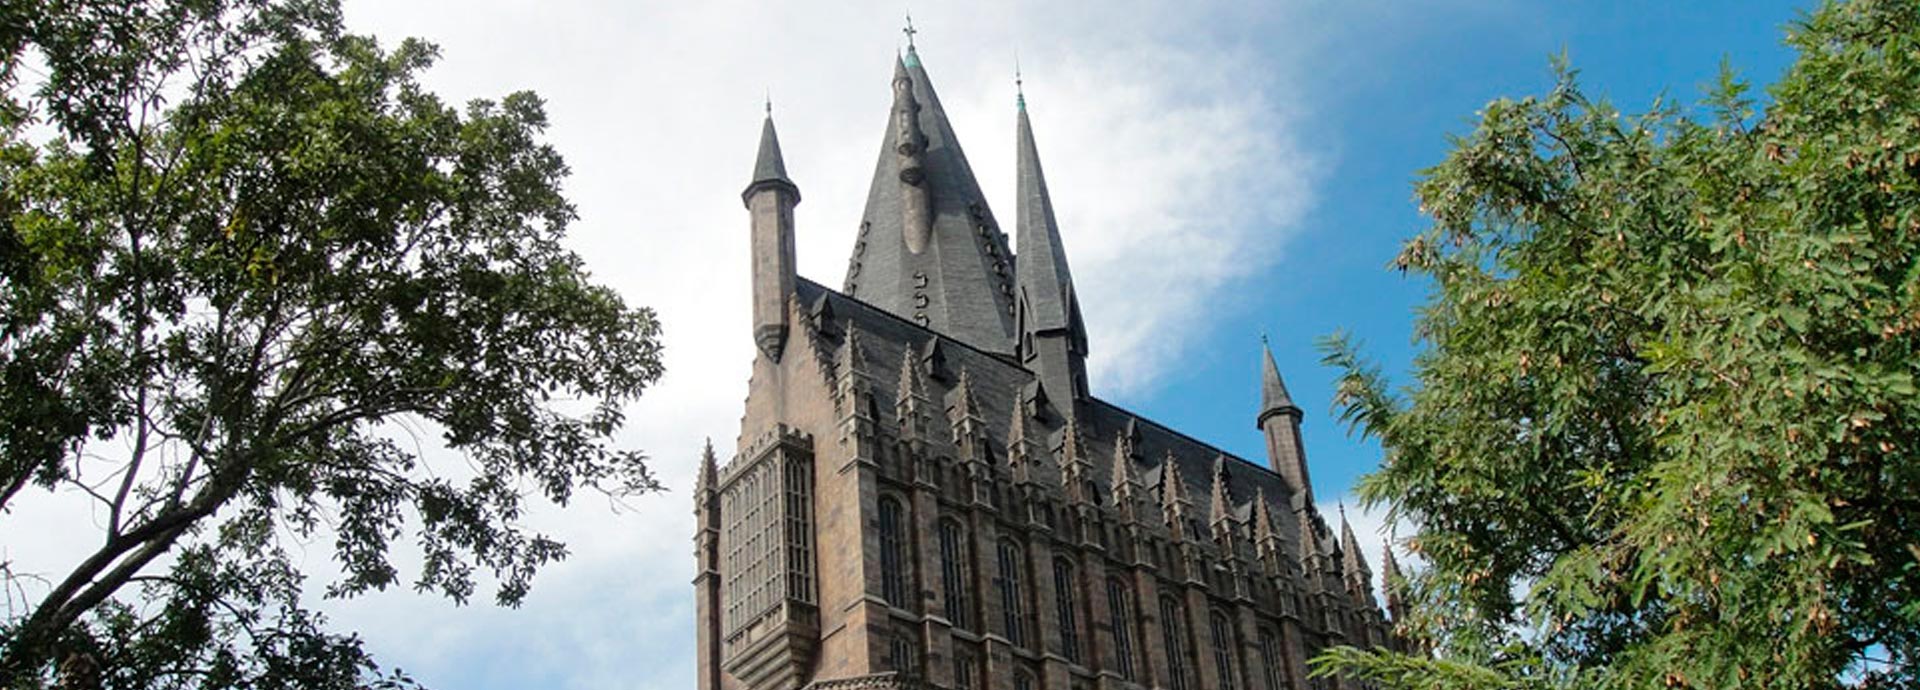 The Wizarding World of Harry Potter in your rental car